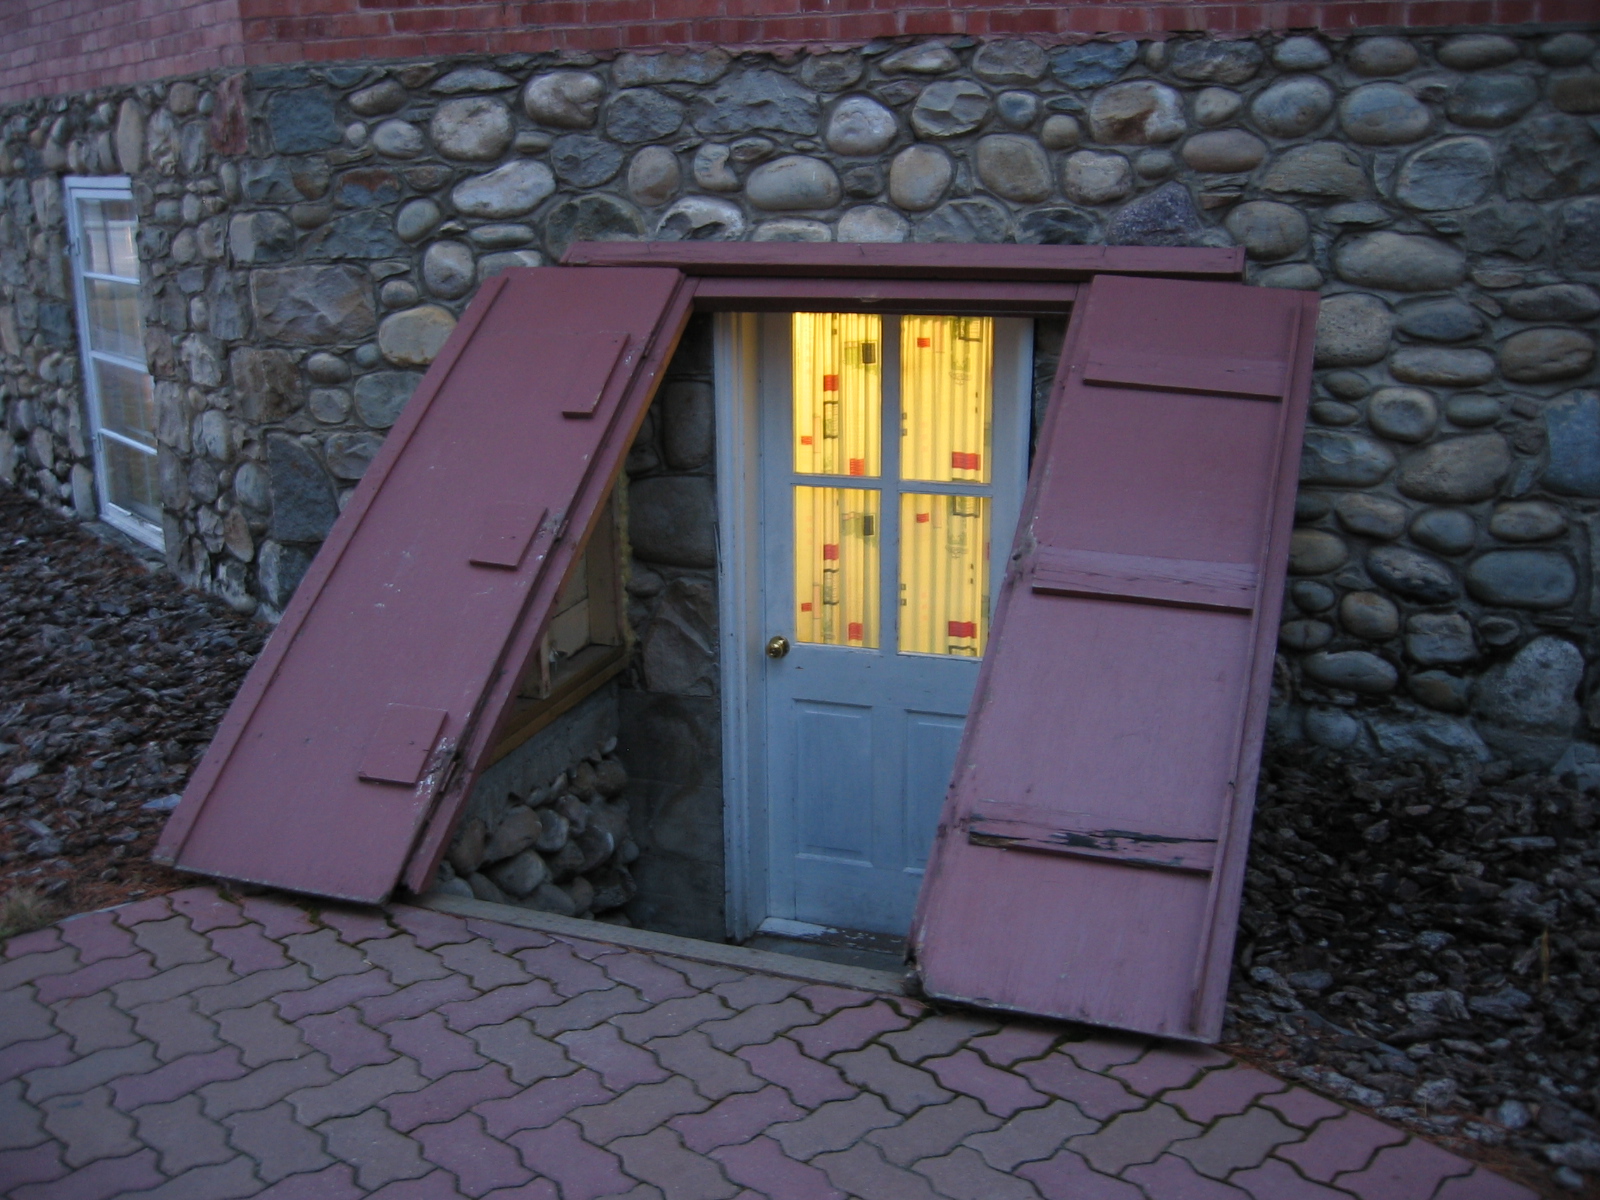 A door leading into a basement | Source: Flickr